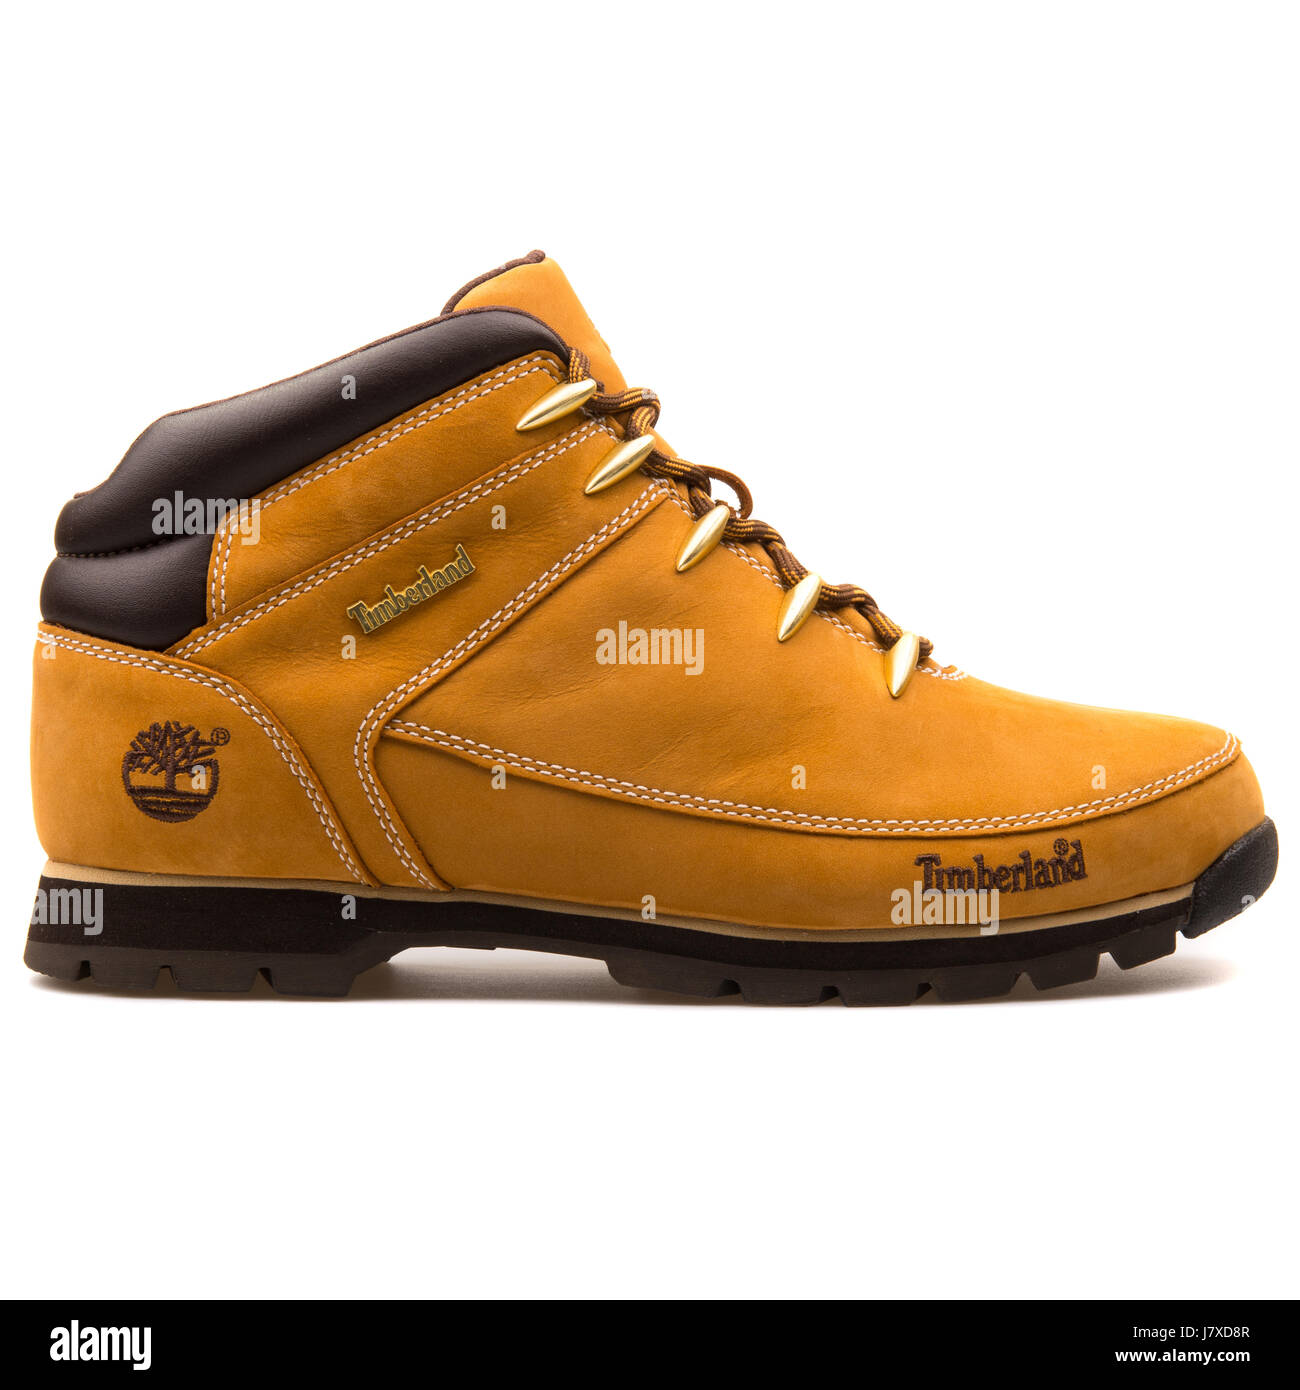 Buy > timberland euro sprint hiker mens boots > in stock